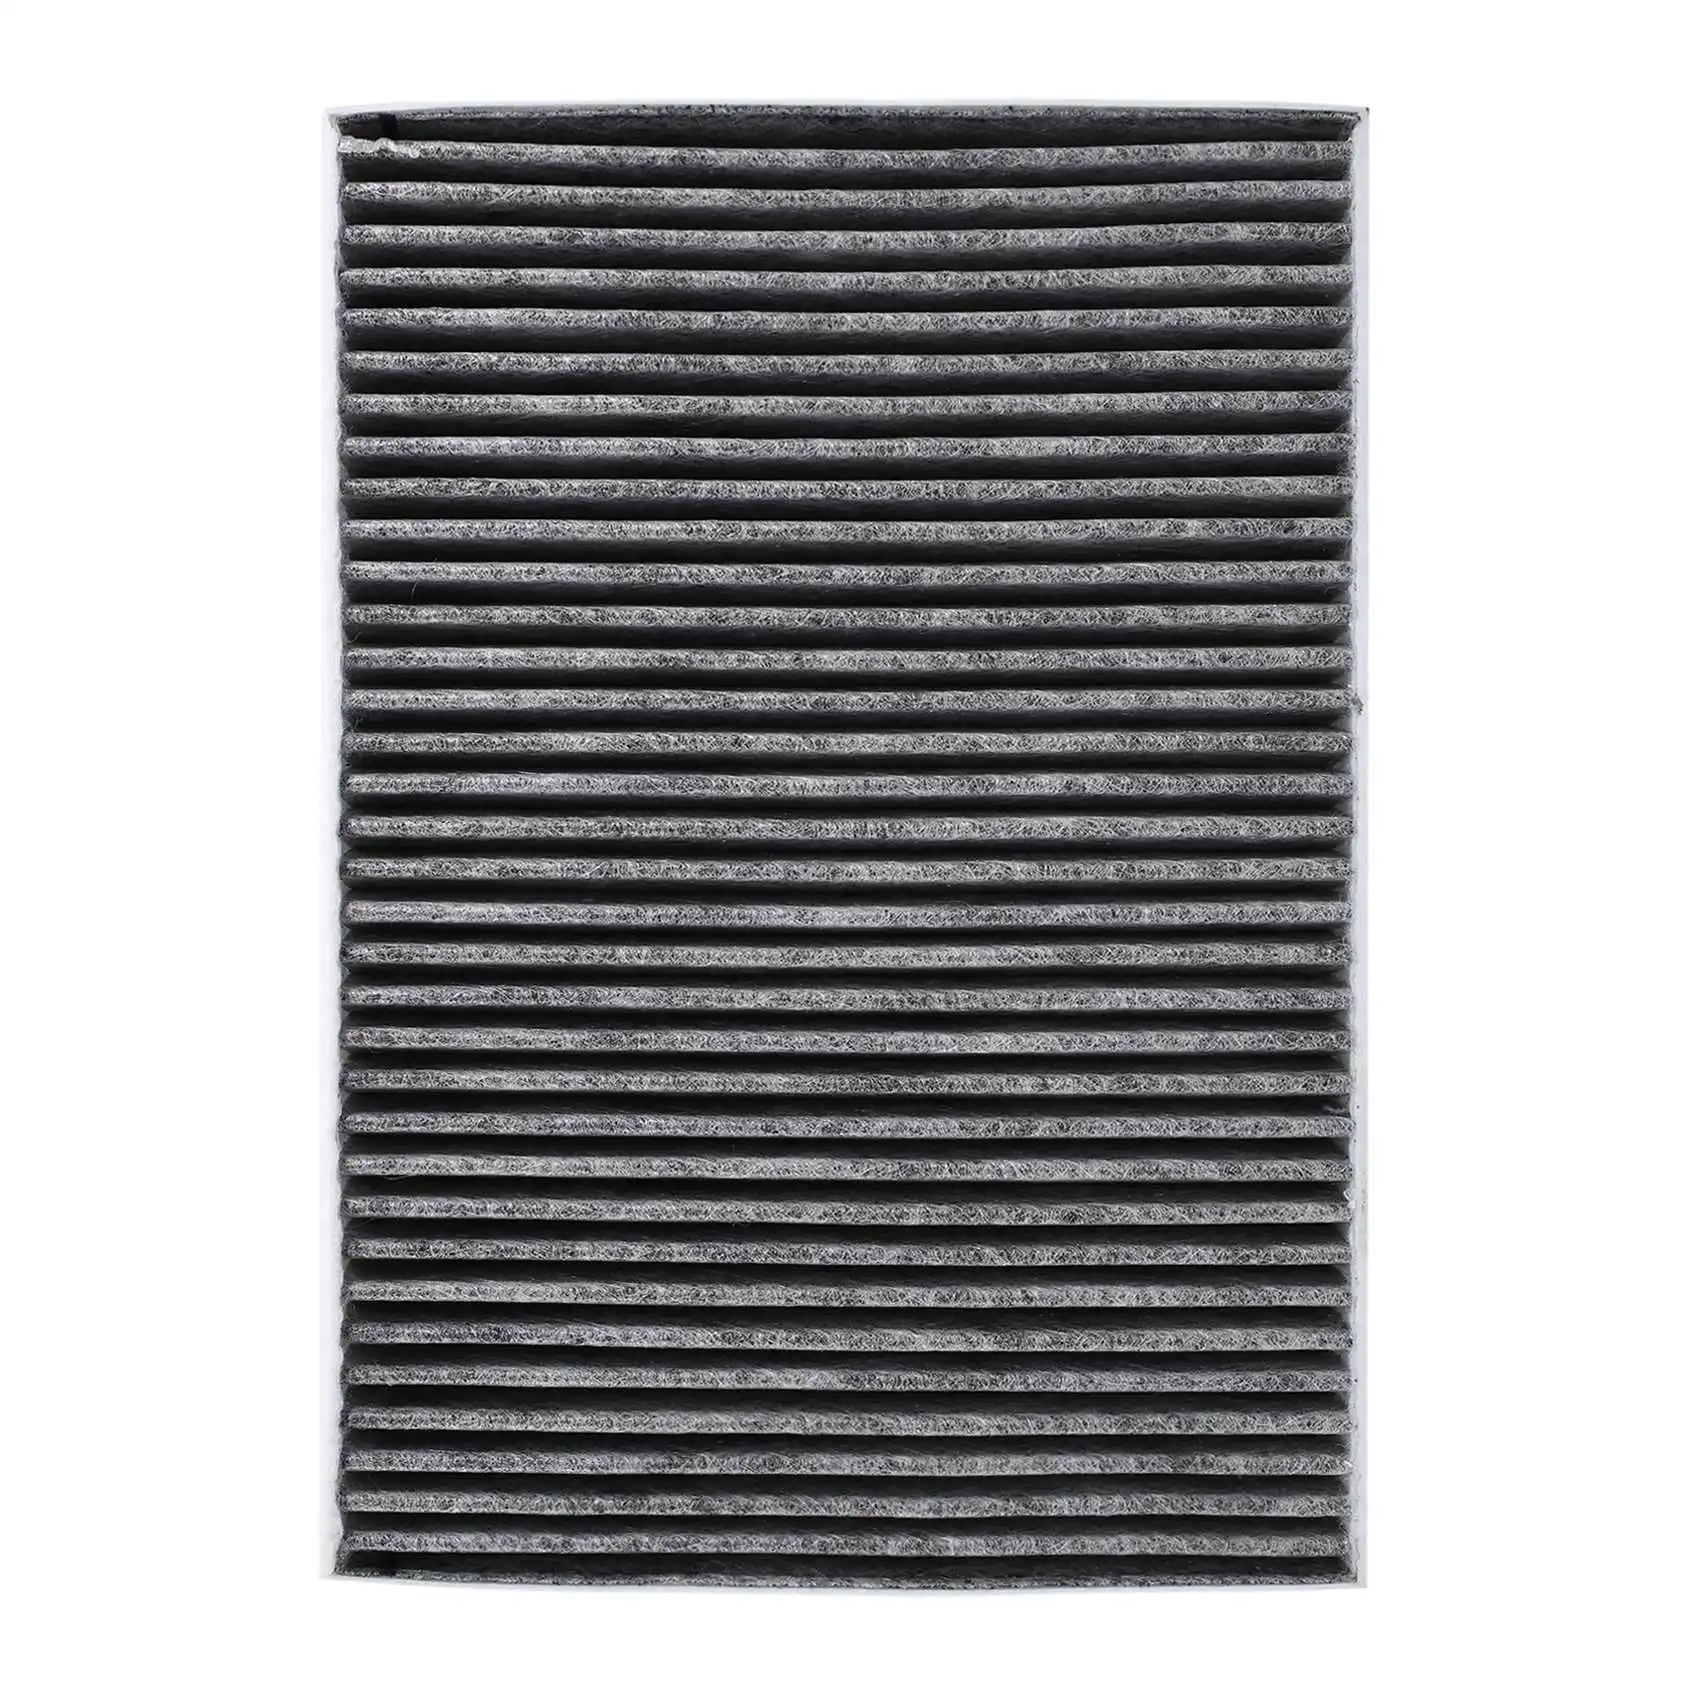 

4M0819439A Car Air Filter for A4 Allroad A5 A6 Activated Carbon Air Filter 8W0819439A Black